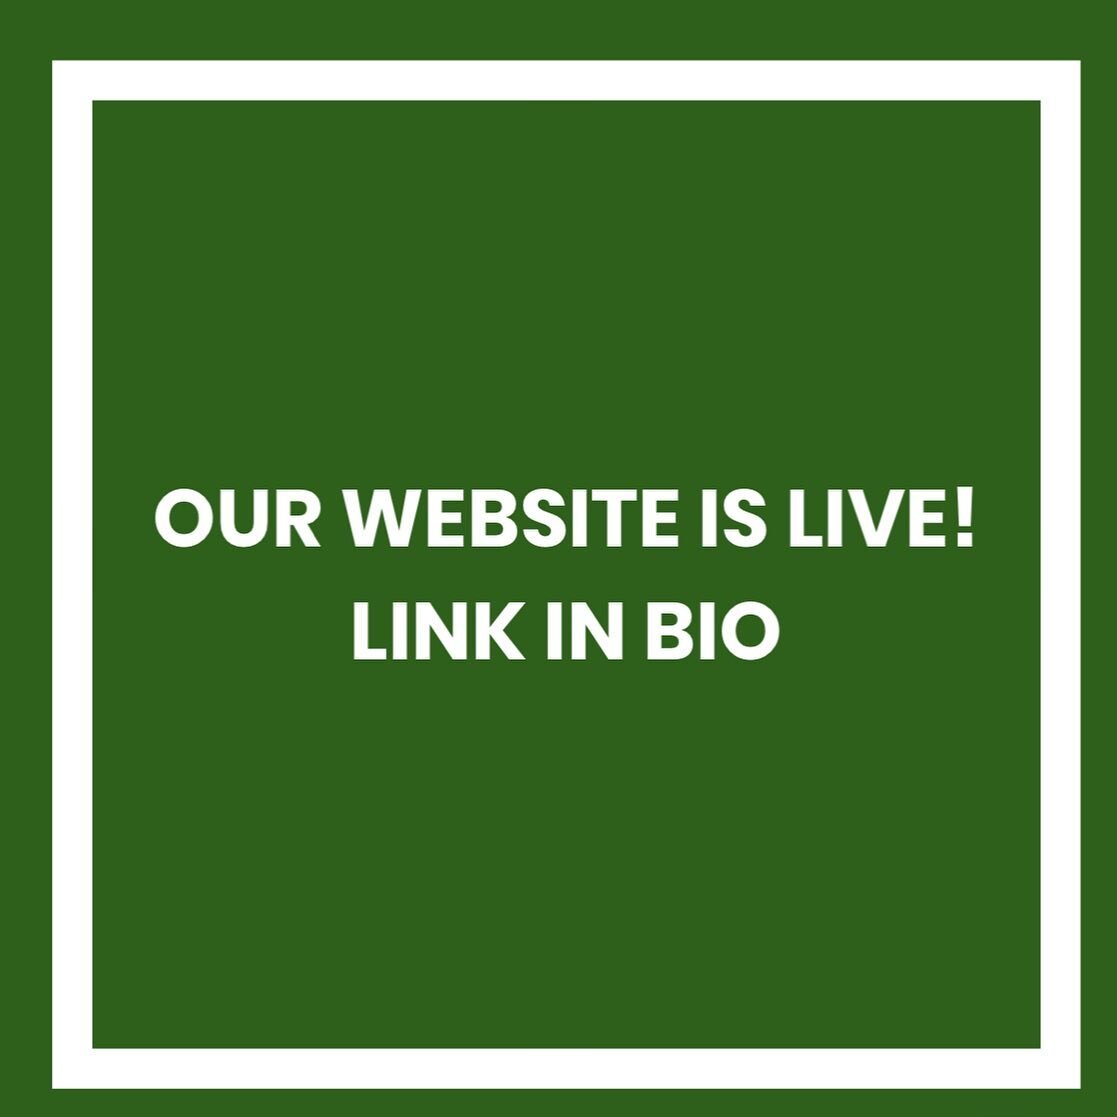 Our brand new website is live! Click the link in our bio to learn more about our story, our product, and our process. Thank you again for all the support and a huge shout out to @fifi2533 for all her hard work in bringing this to fruition. 💚